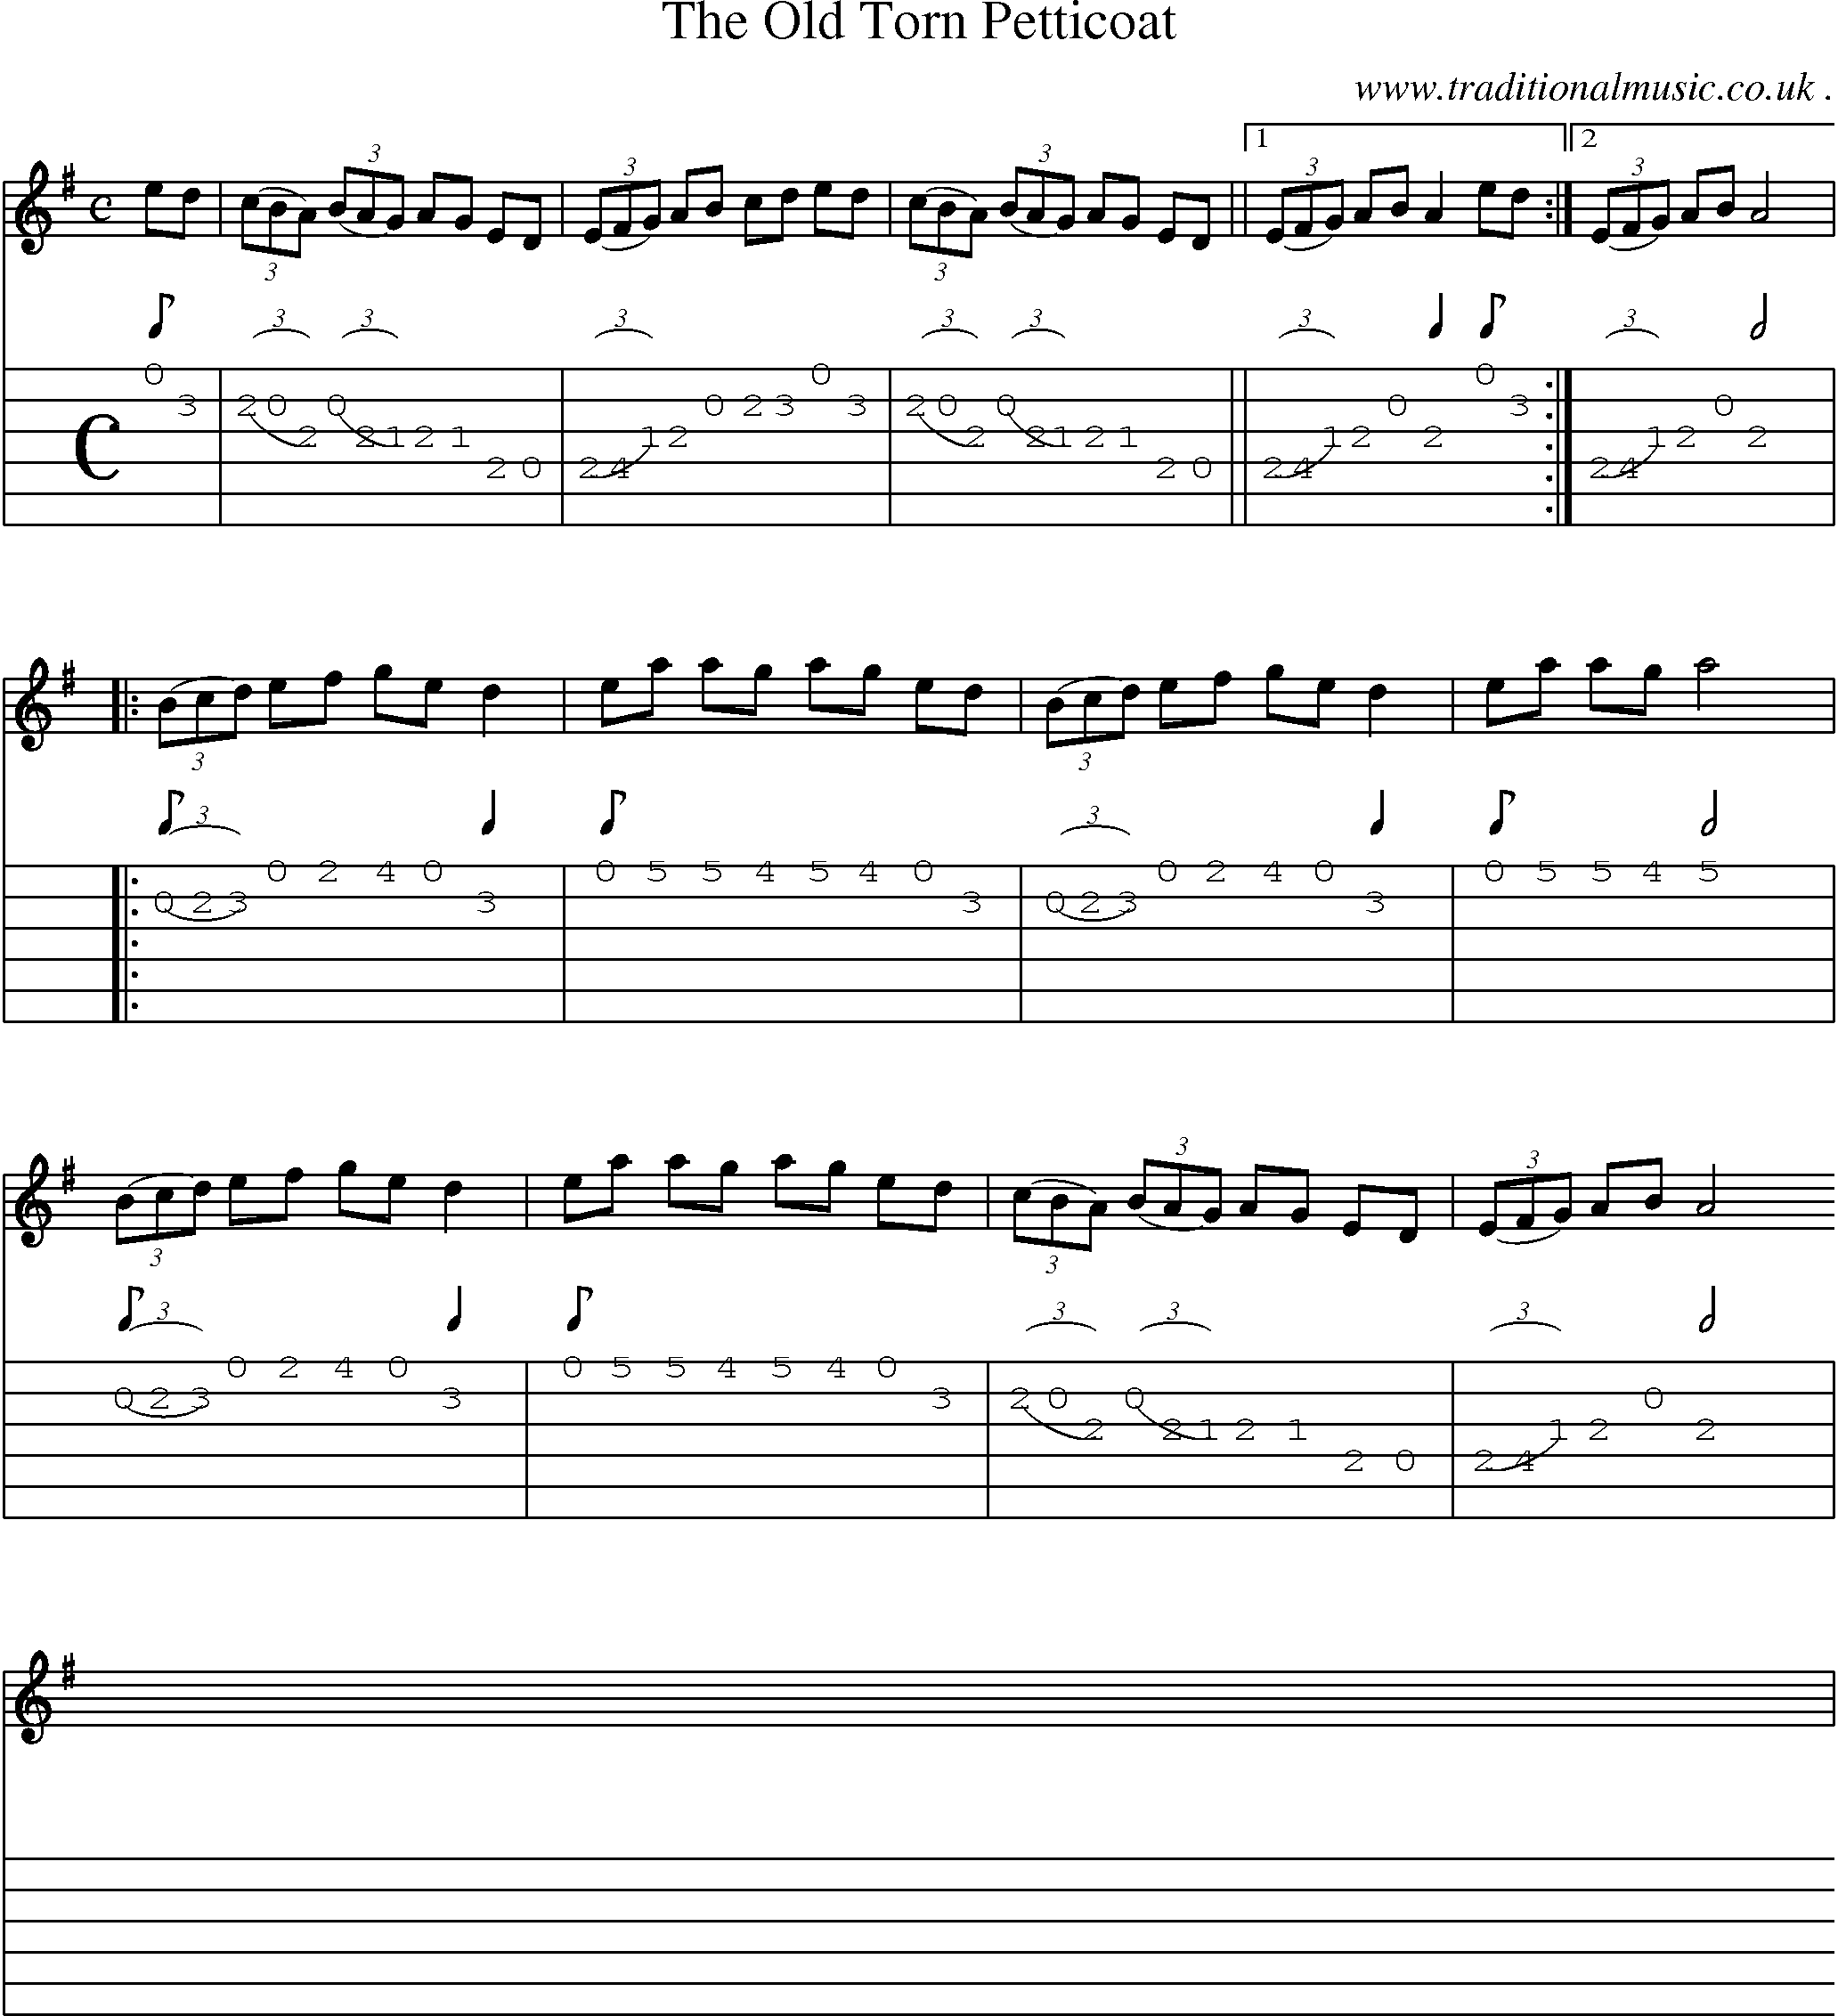 Sheet-Music and Guitar Tabs for The Old Torn Petticoat